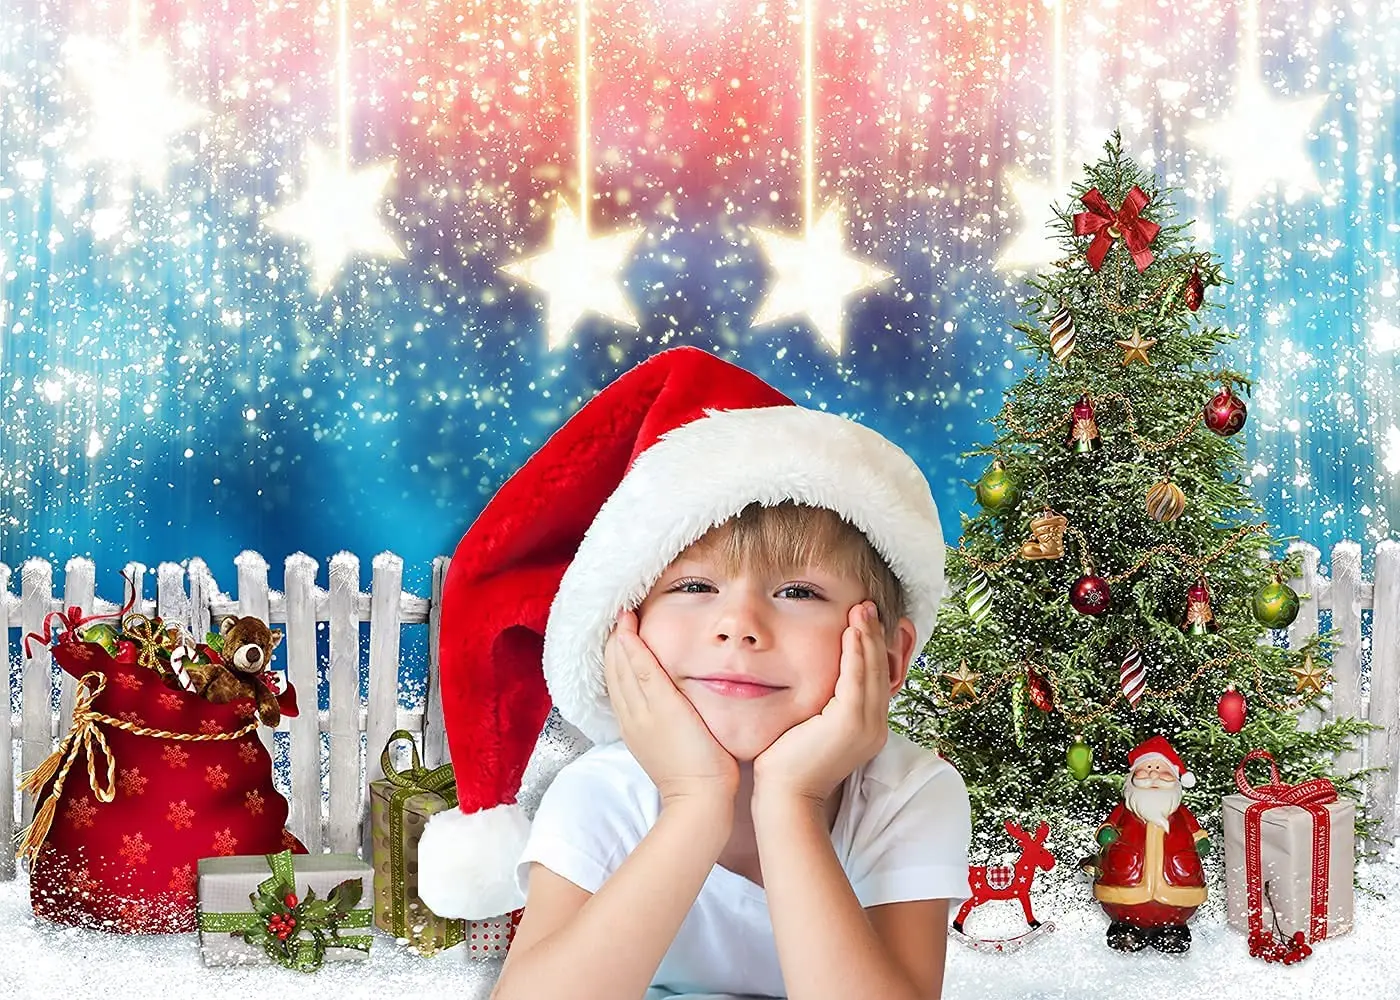 Christmas Photography Backdrop Merry Xmas Snow Blue Wonderland Background Santa Gifts Trees Banner Baby Kids Party Decorations enlarge